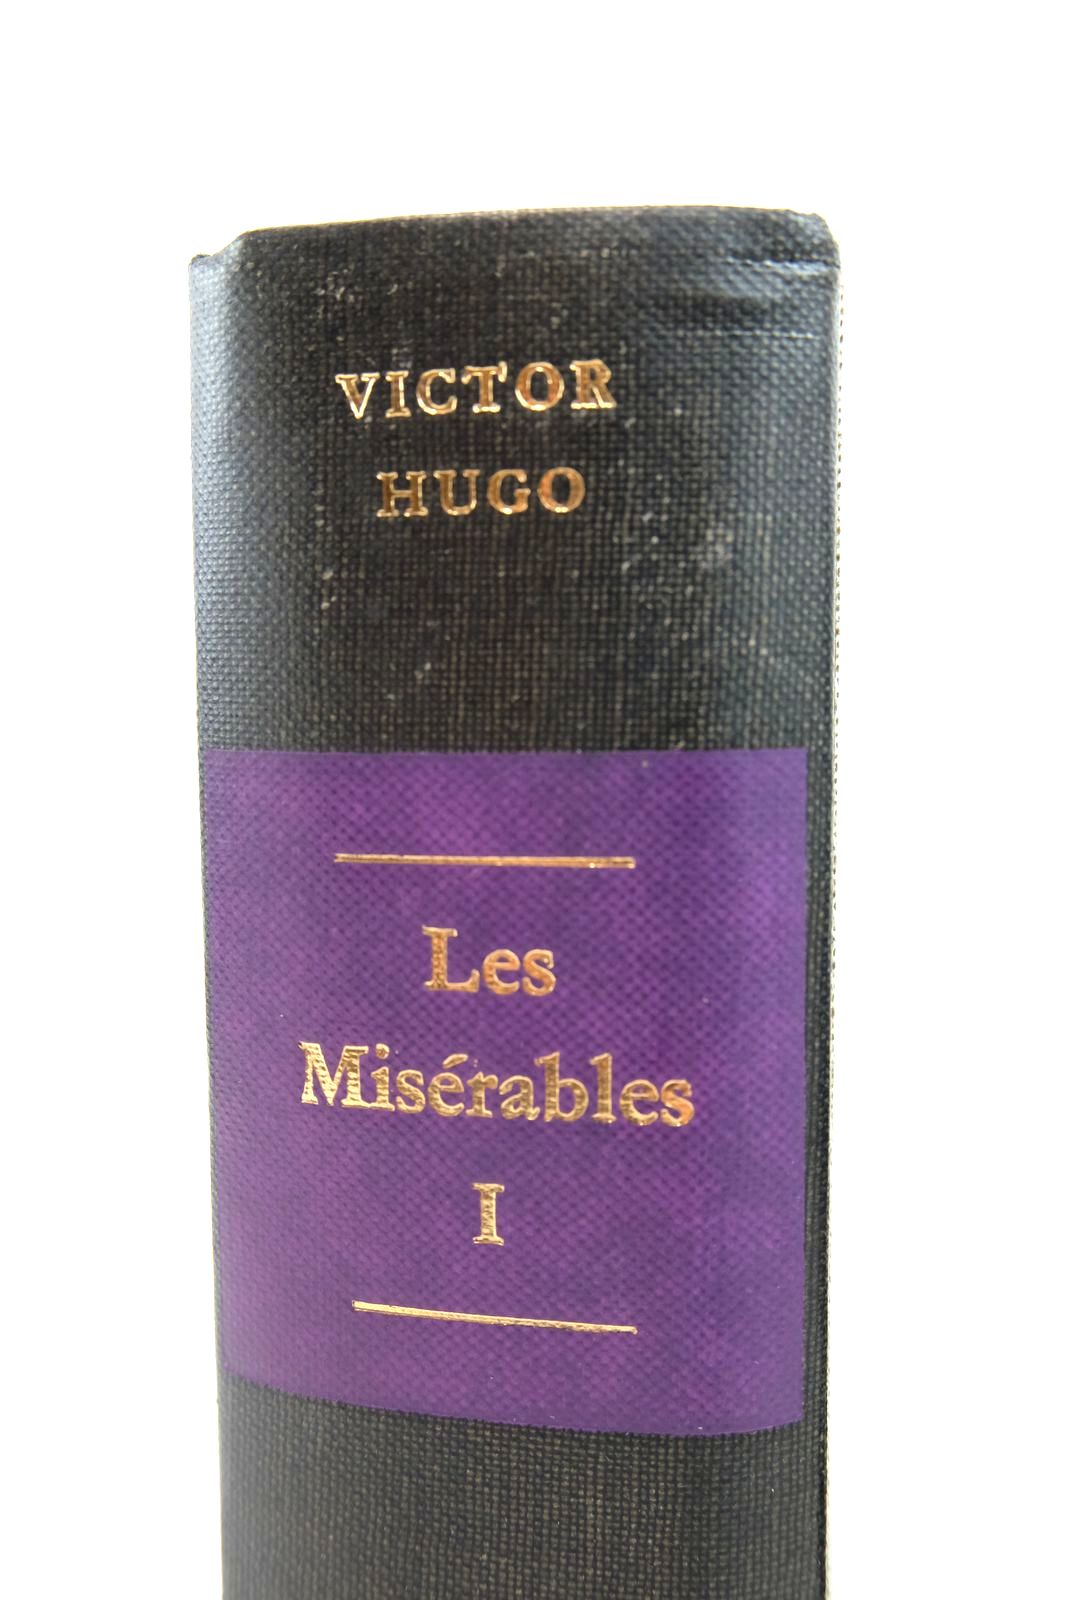 Photo of LES MISERABLES (2 VOLUMES) written by Hugo, Victor
Denny, Norman illustrated by Keeping, Charles published by Folio Press (STOCK CODE: 2140860)  for sale by Stella & Rose's Books